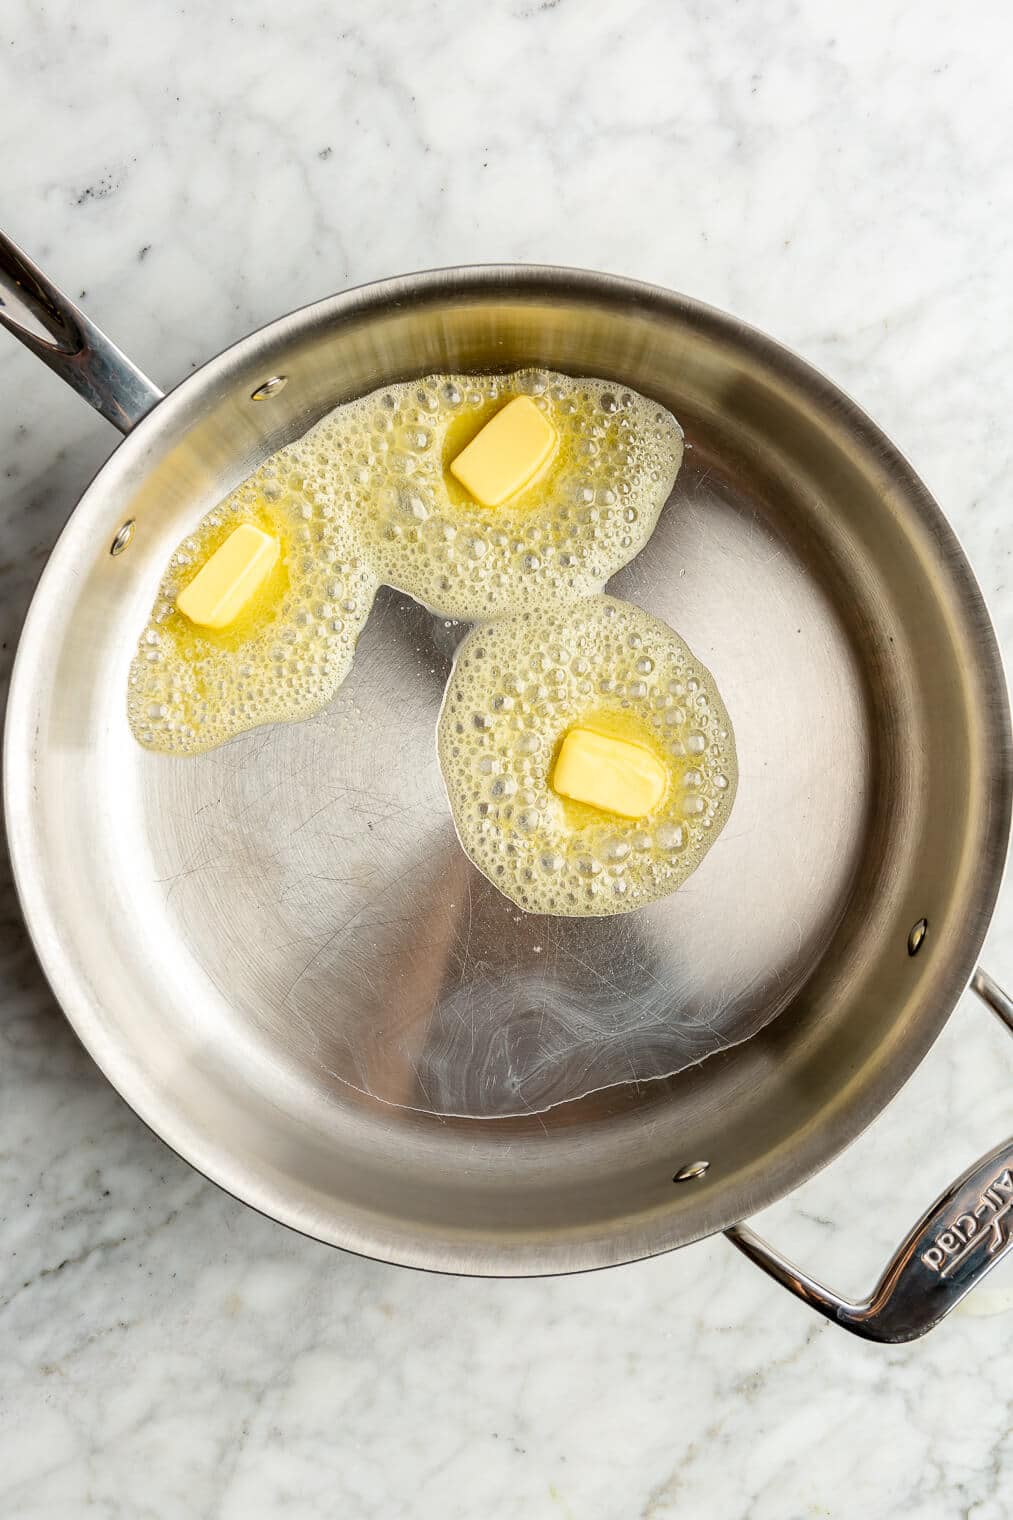 Butter melting and bubbling in an all-clad pan on a grey and white marble surface.